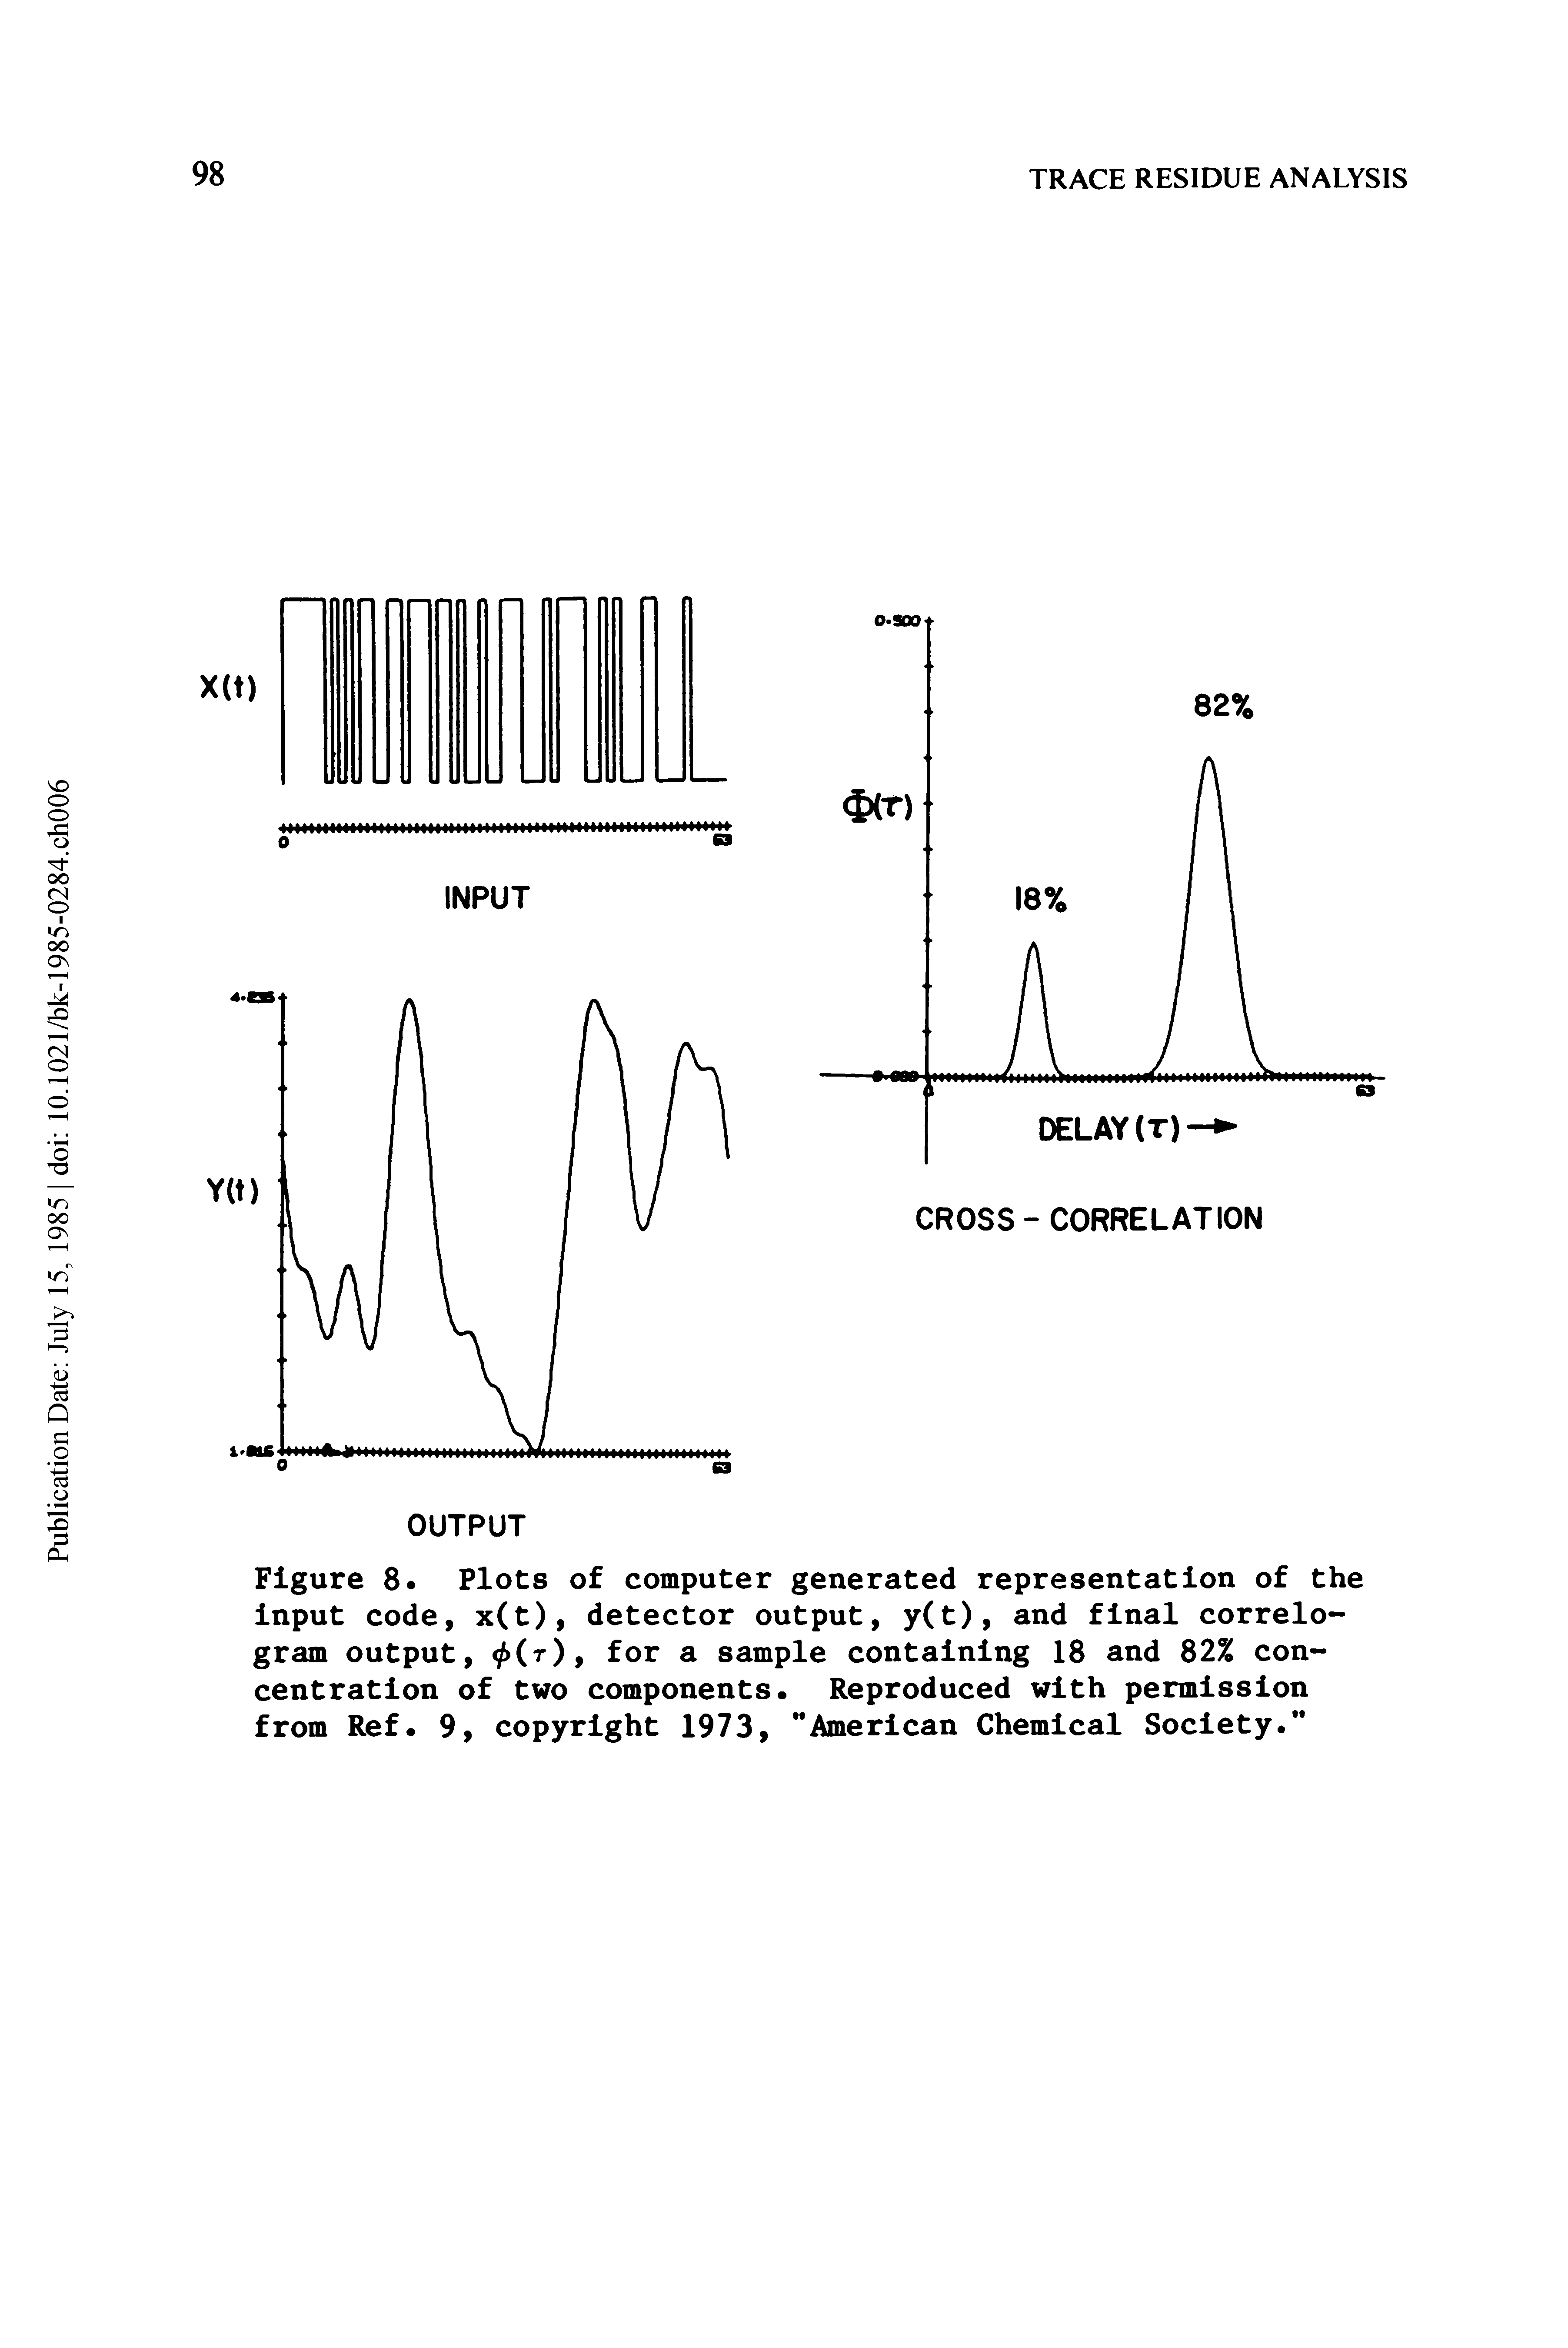 Figure 8. Plots of computer generated representation of the input code, x(t), detector output, y(t), and final correlo-gram output, < (r), for a sample containing 18 and 82% concentration of two components. Reproduced with permission from Ref. 9, copyright 1973, "American Chemical Society."...